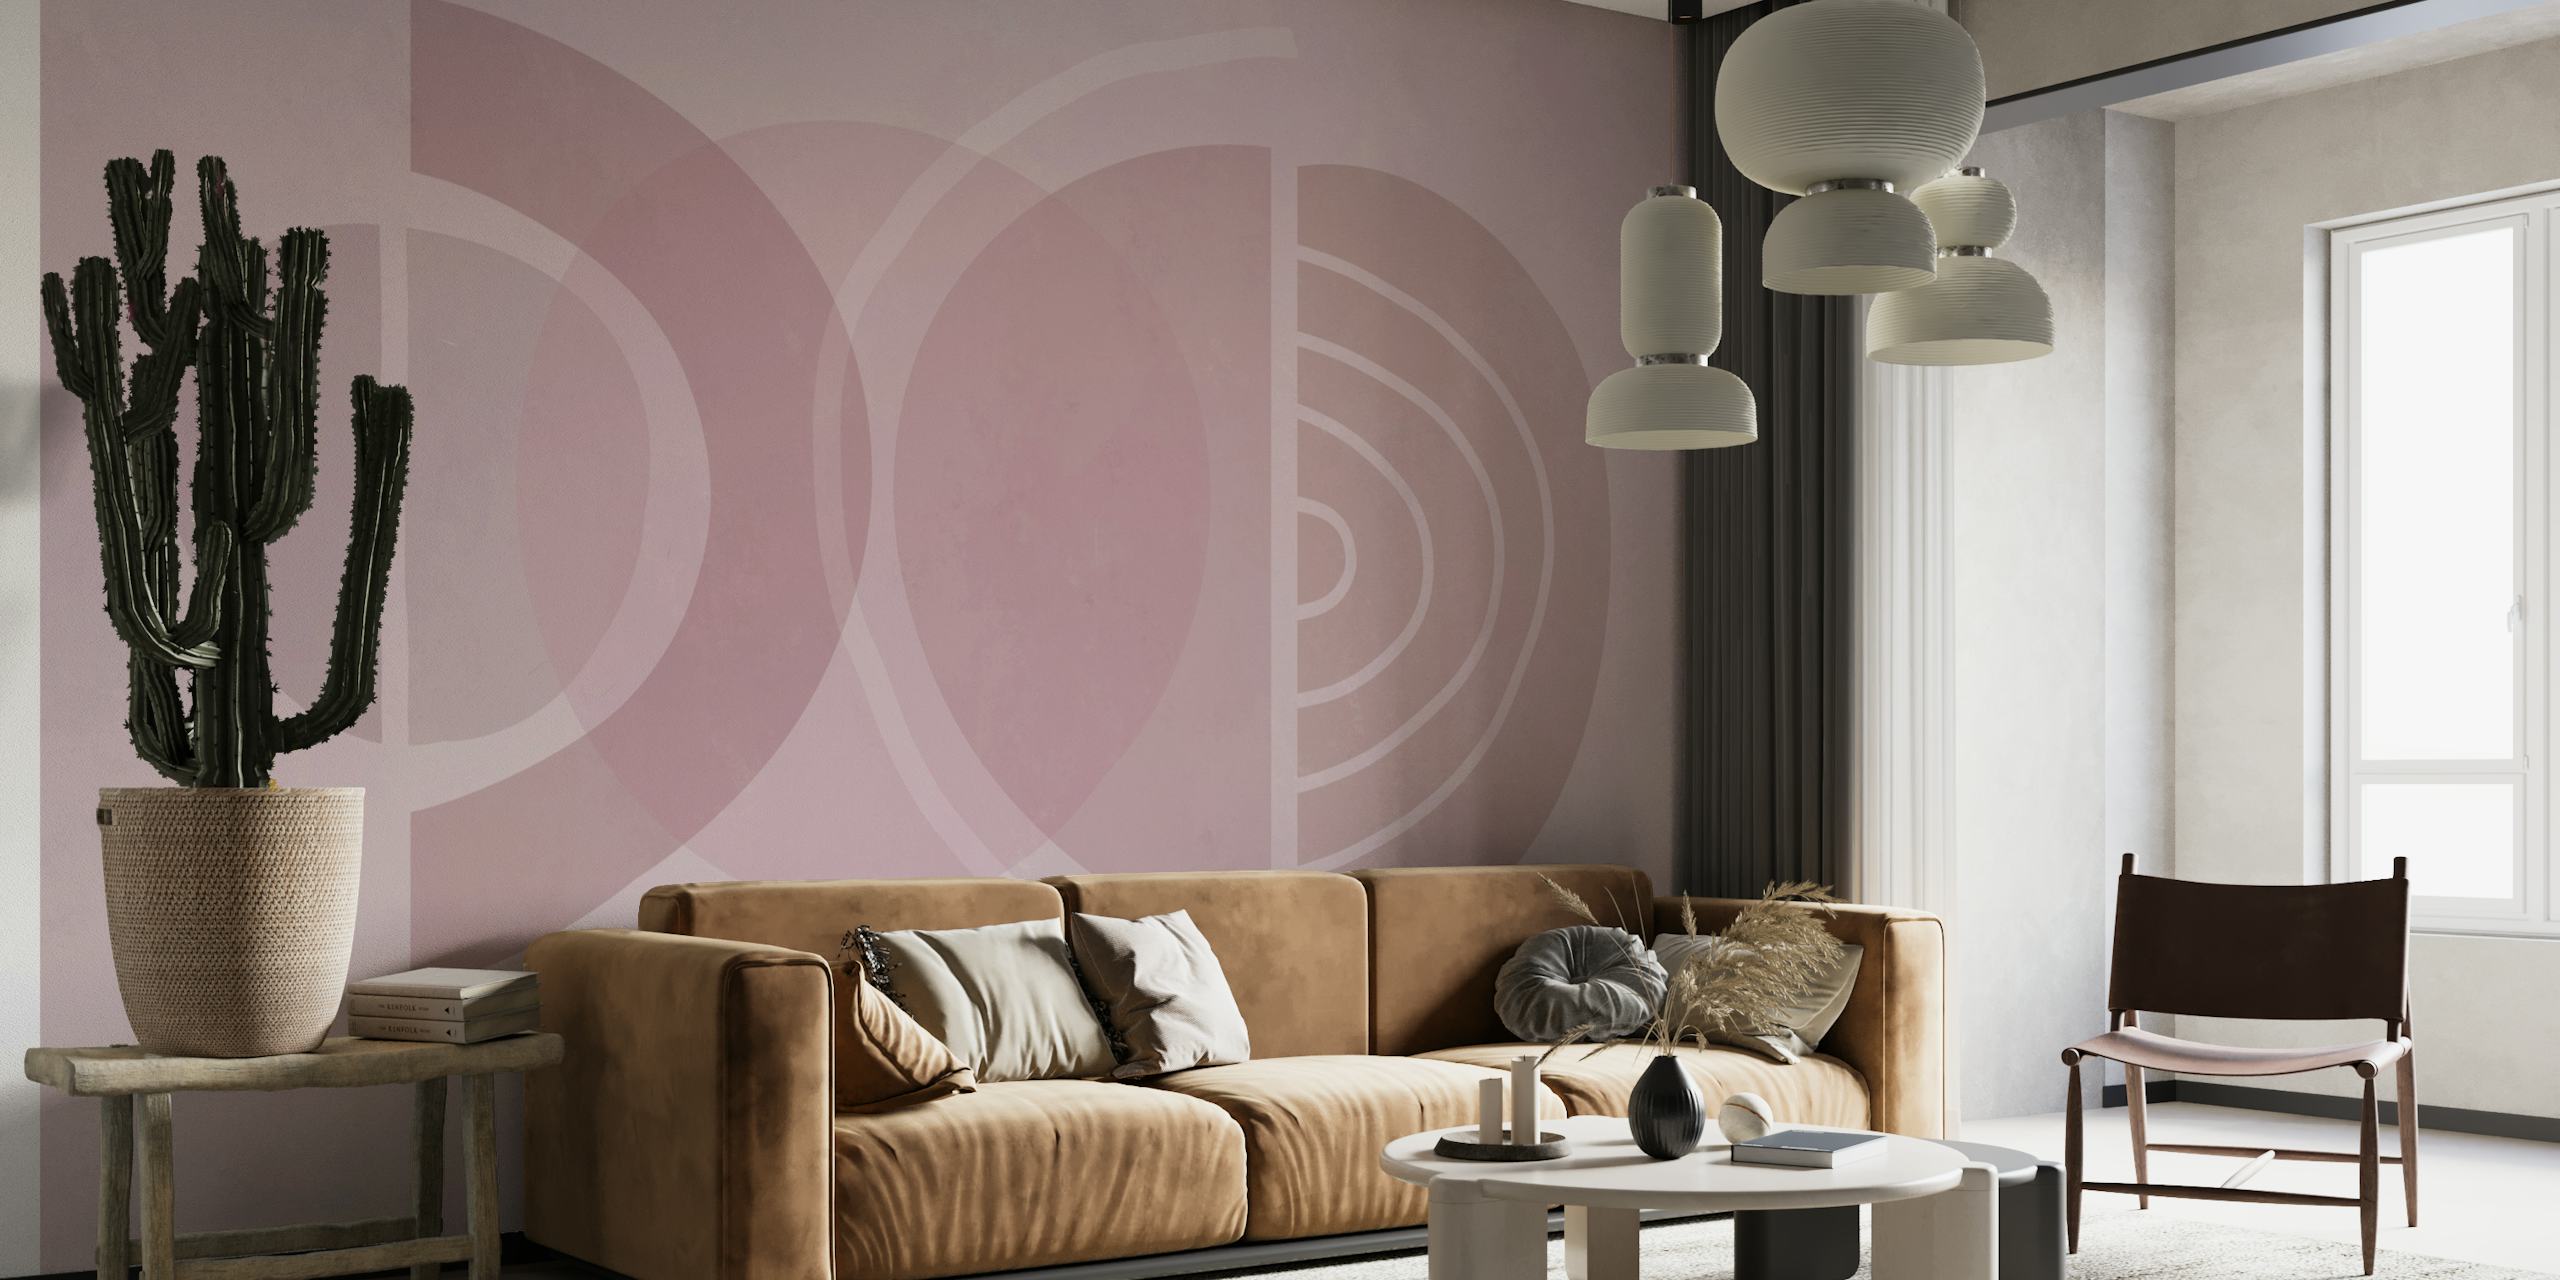 Mid Century Eclectic Calm Vibes In Dusty Pink Shapes papel pintado